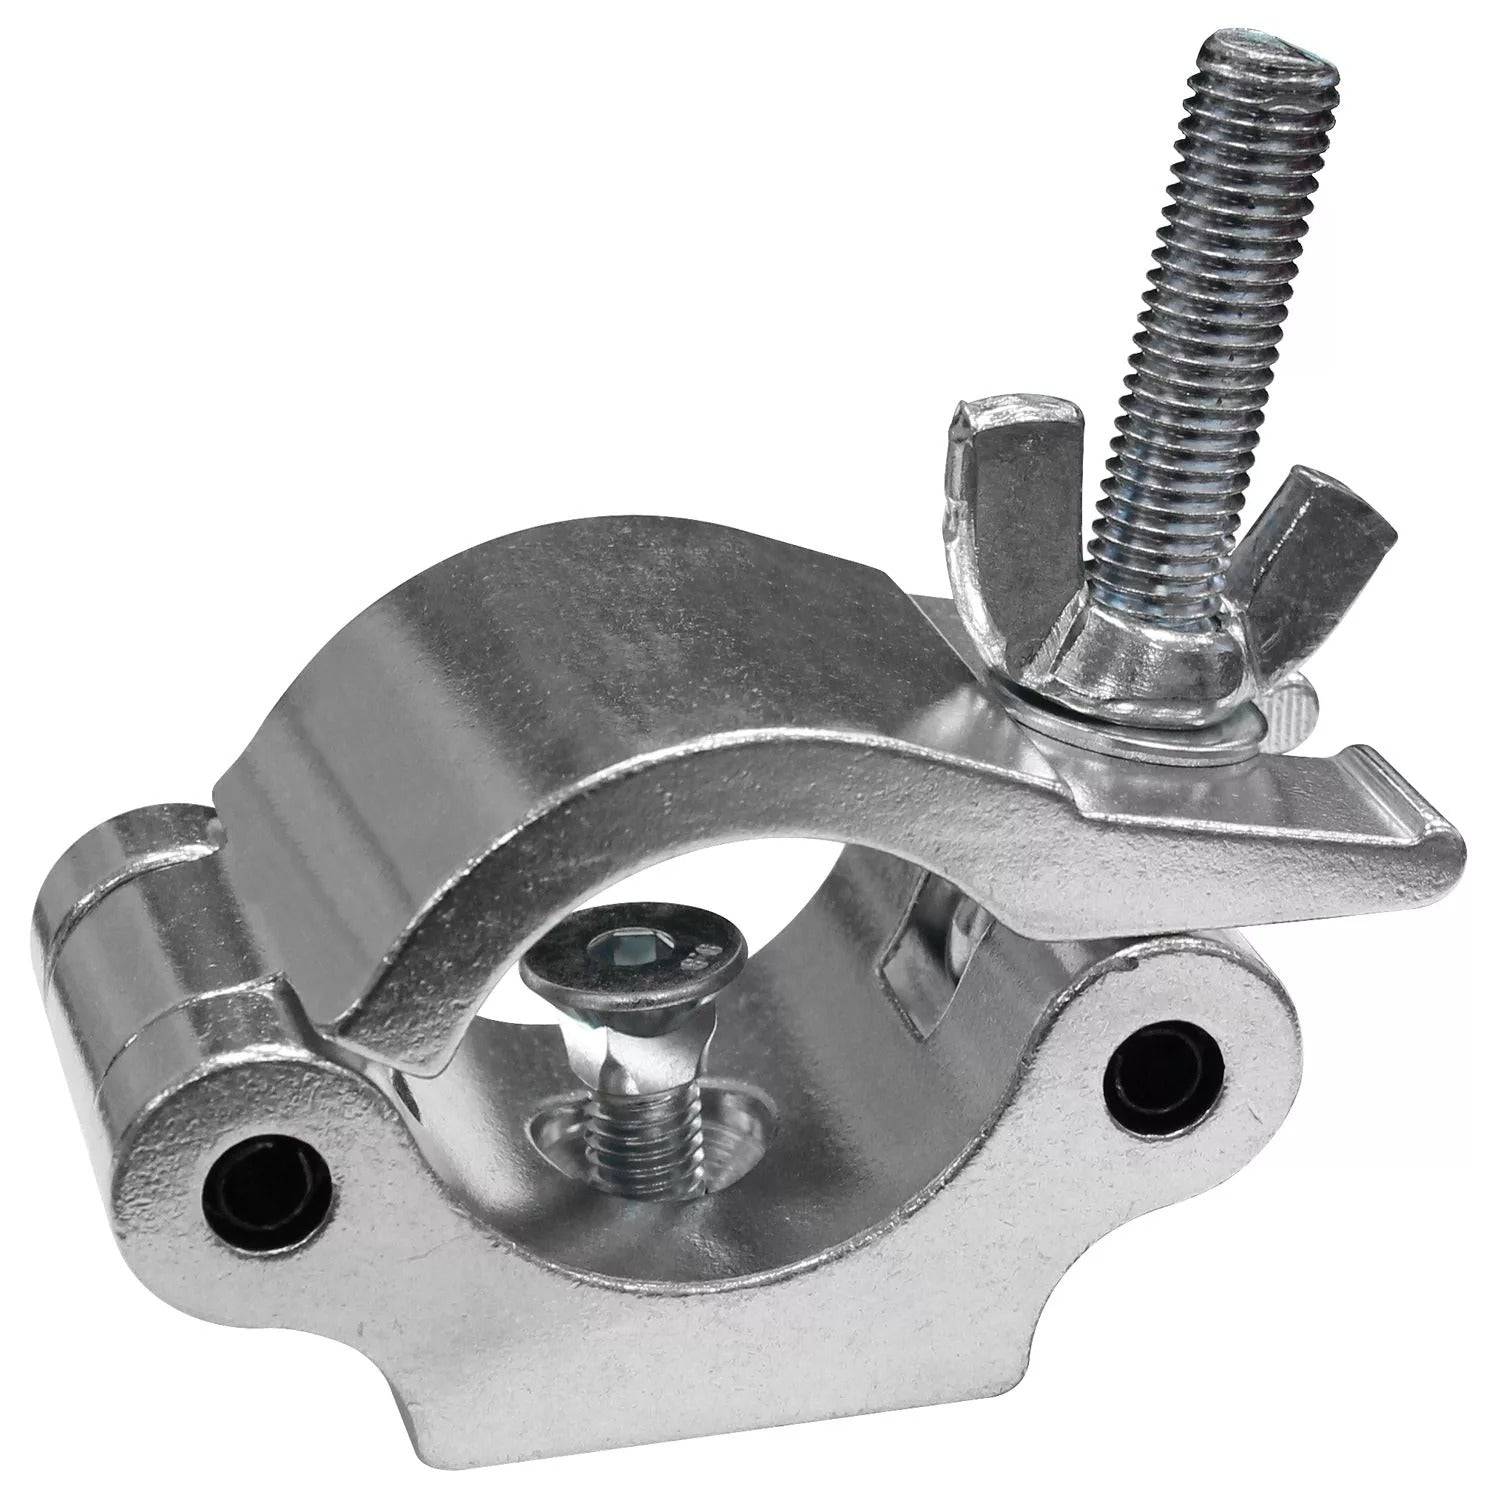 Odyssey LACP50S, Aluminum Pro Wide Clamp With A Square Neck Countersunk Bolt - Hollywood DJ